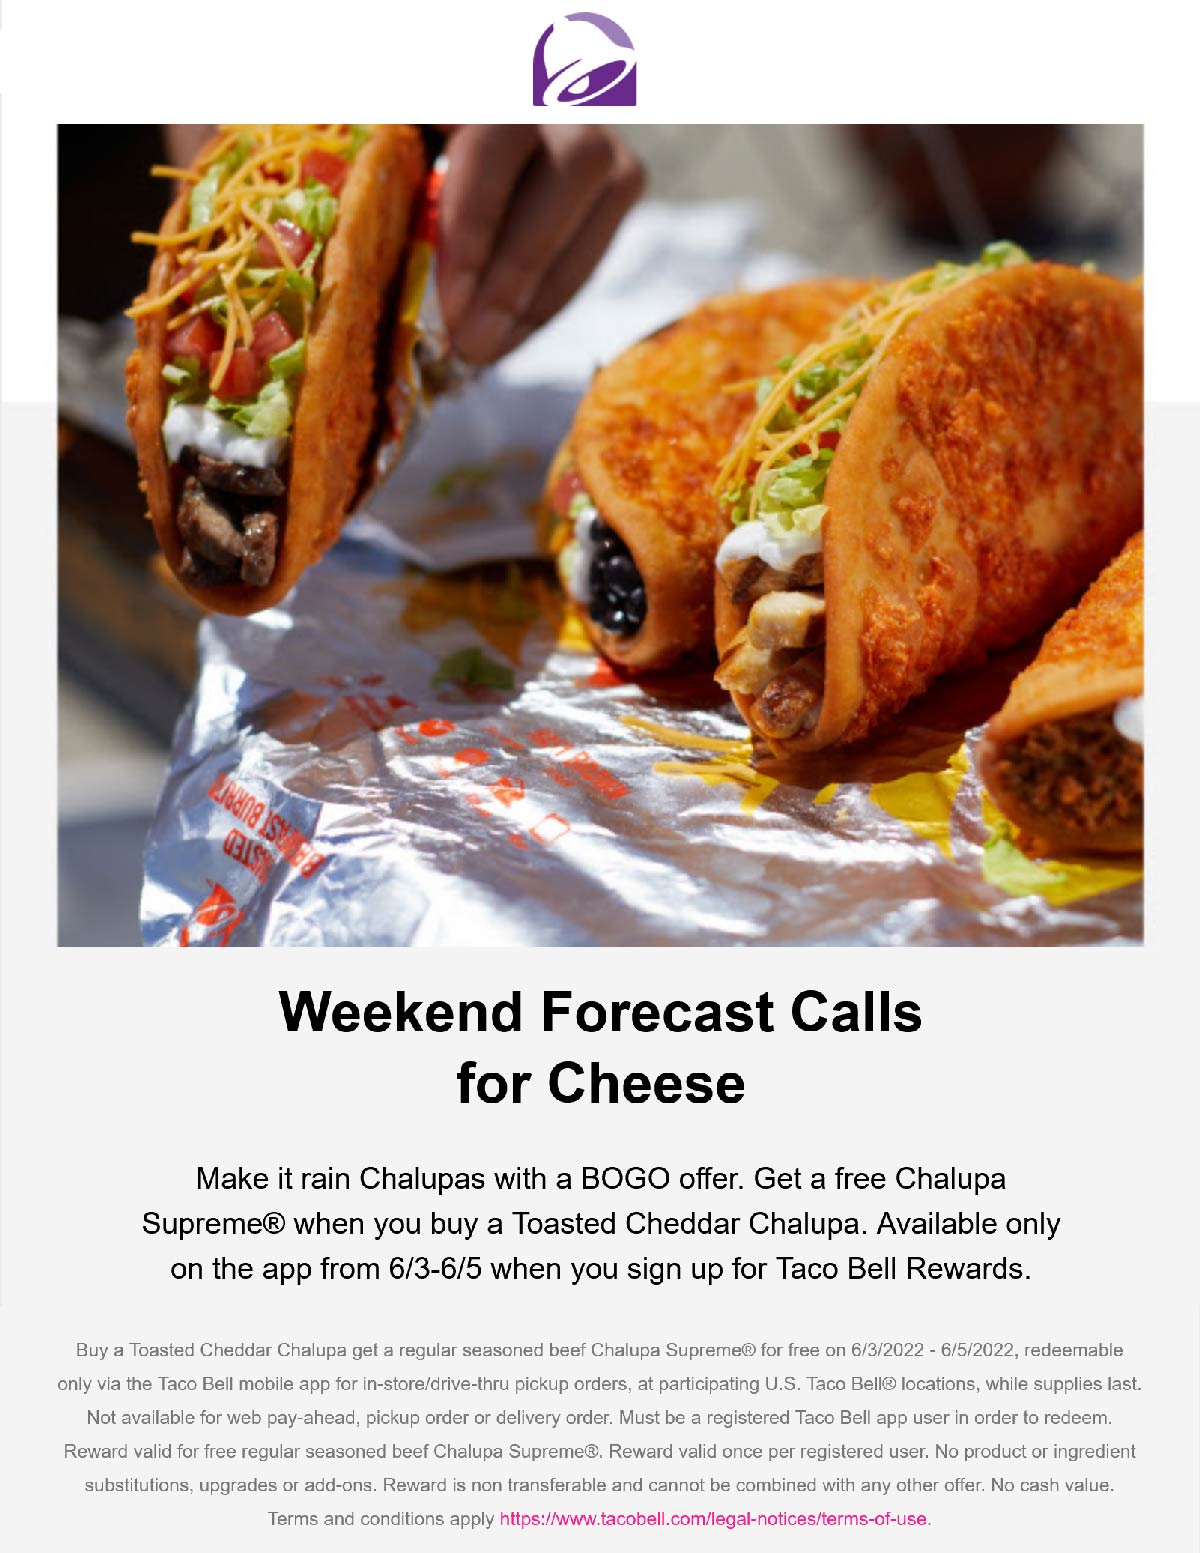 Taco Bell restaurants Coupon  Second chalupa free via mobile at Taco Bell #tacobell 